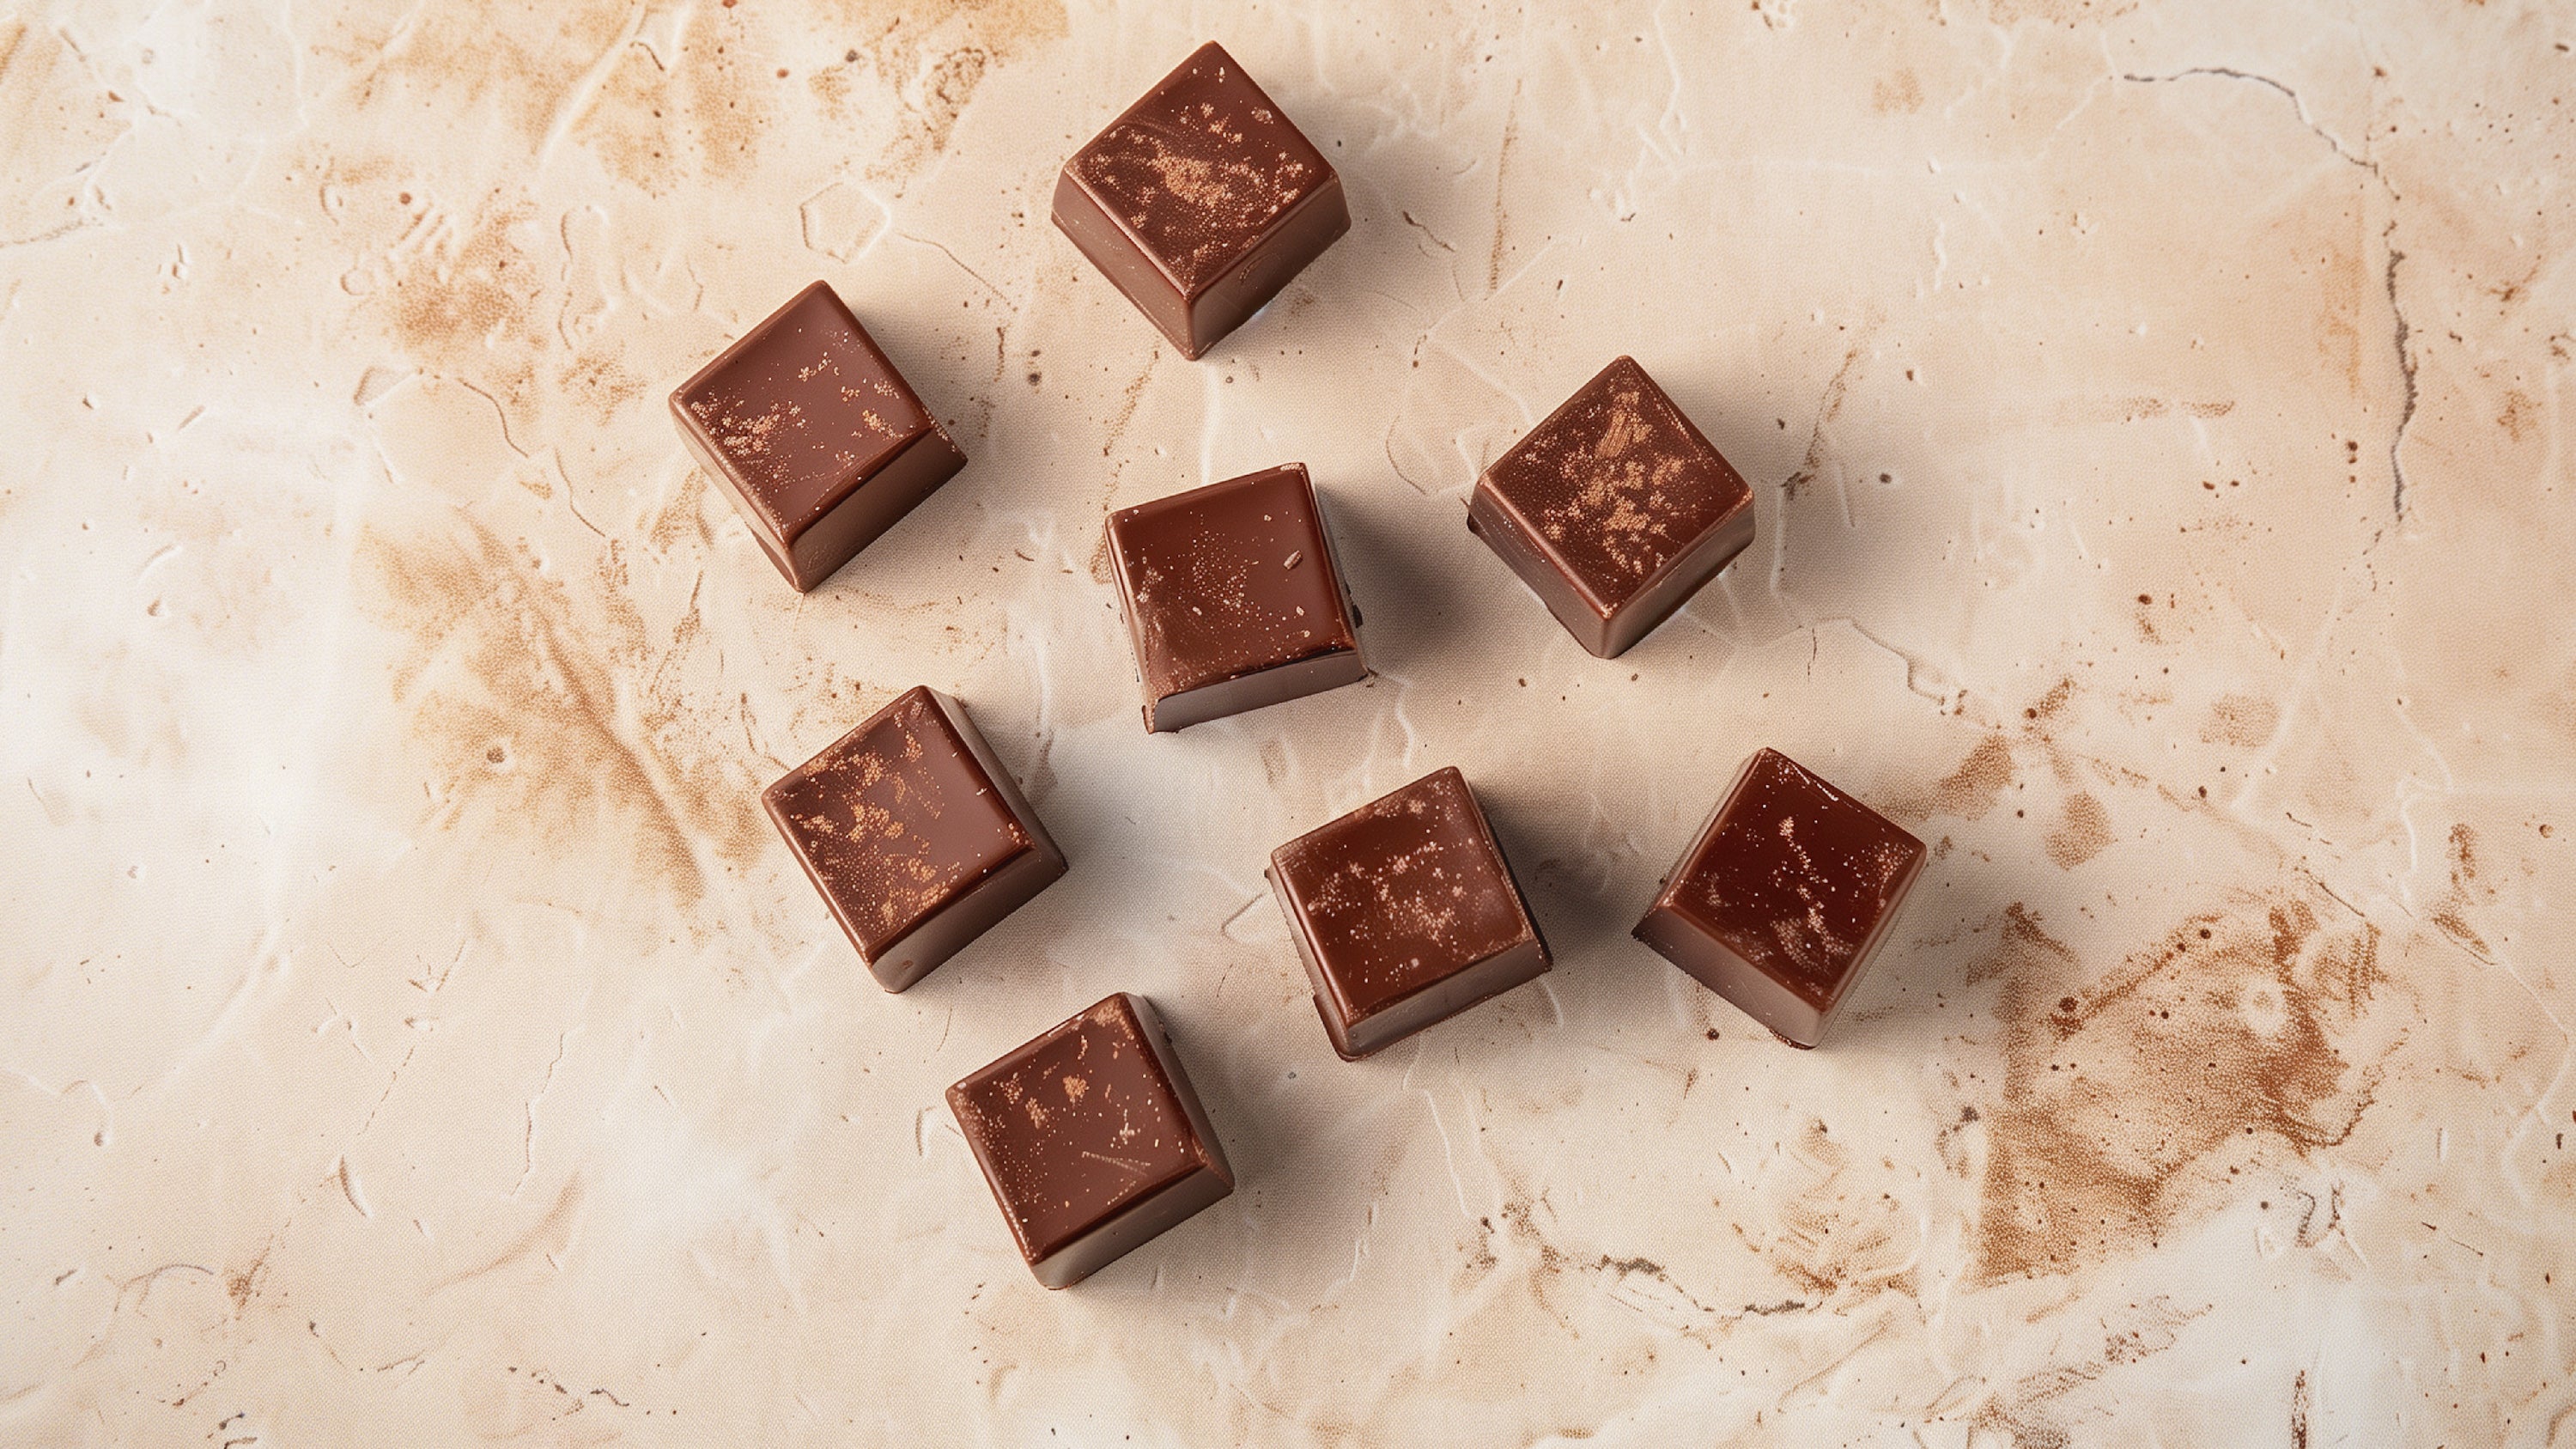 An image of 8 pieces of organic kanna chocolate on a light earth tone texture surface. The kanna chocolate is made by kanna extract company with LIFT kanna extract for sale available in wholesale, bulk, white label, and retail pricing.